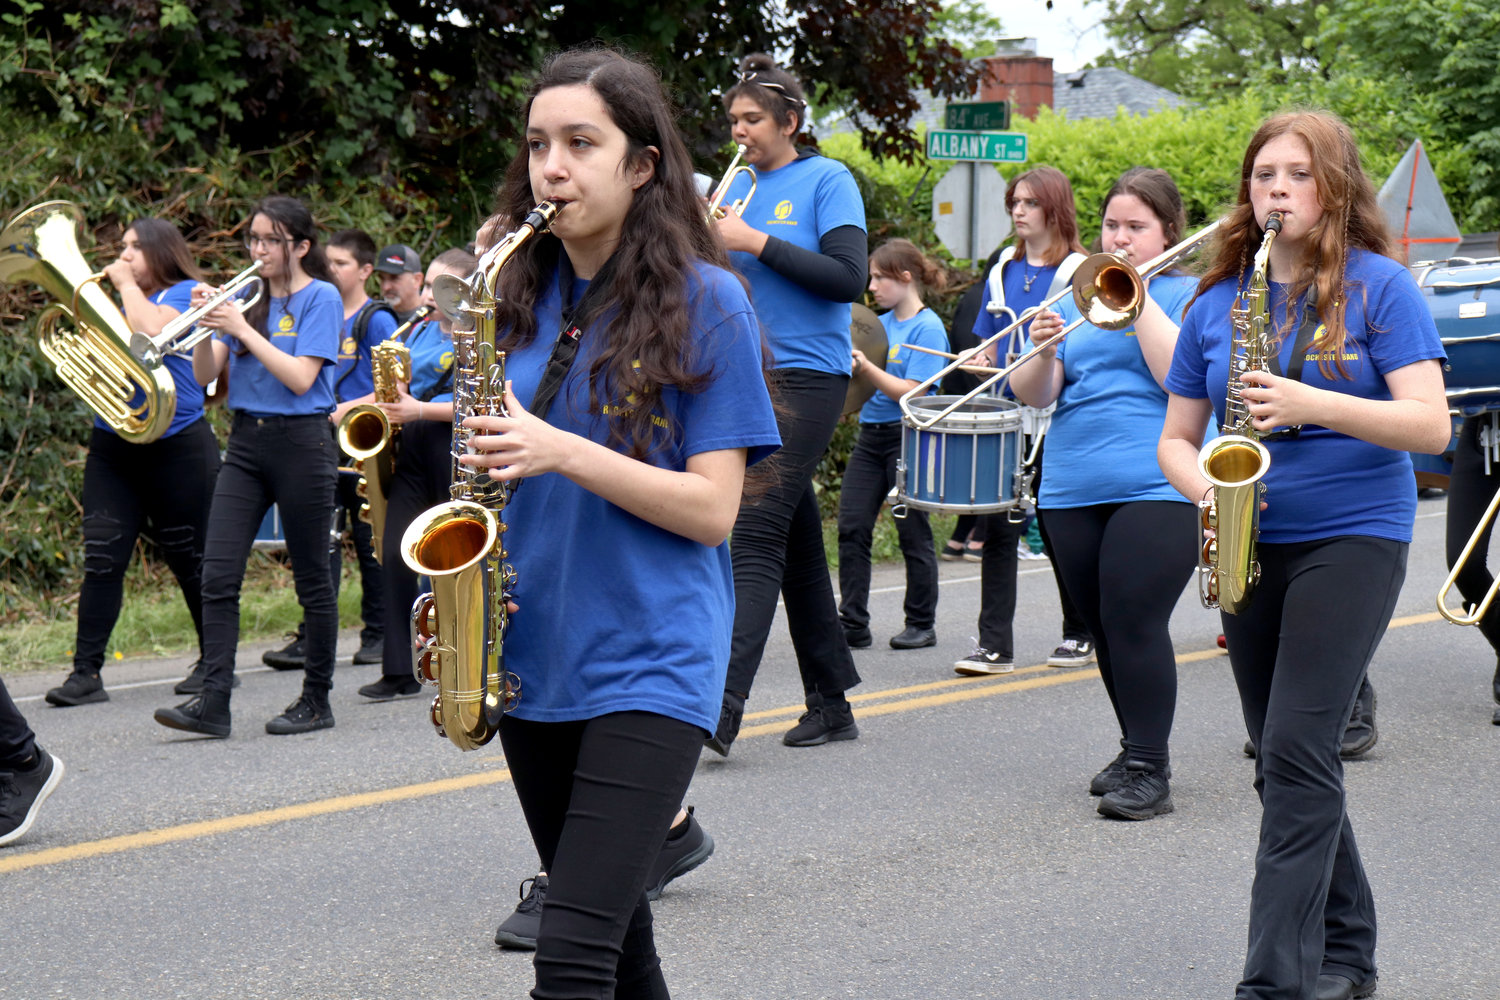 The Rochester Middle School marching band performs in the Swede Day Parade in Rochester on Saturday.